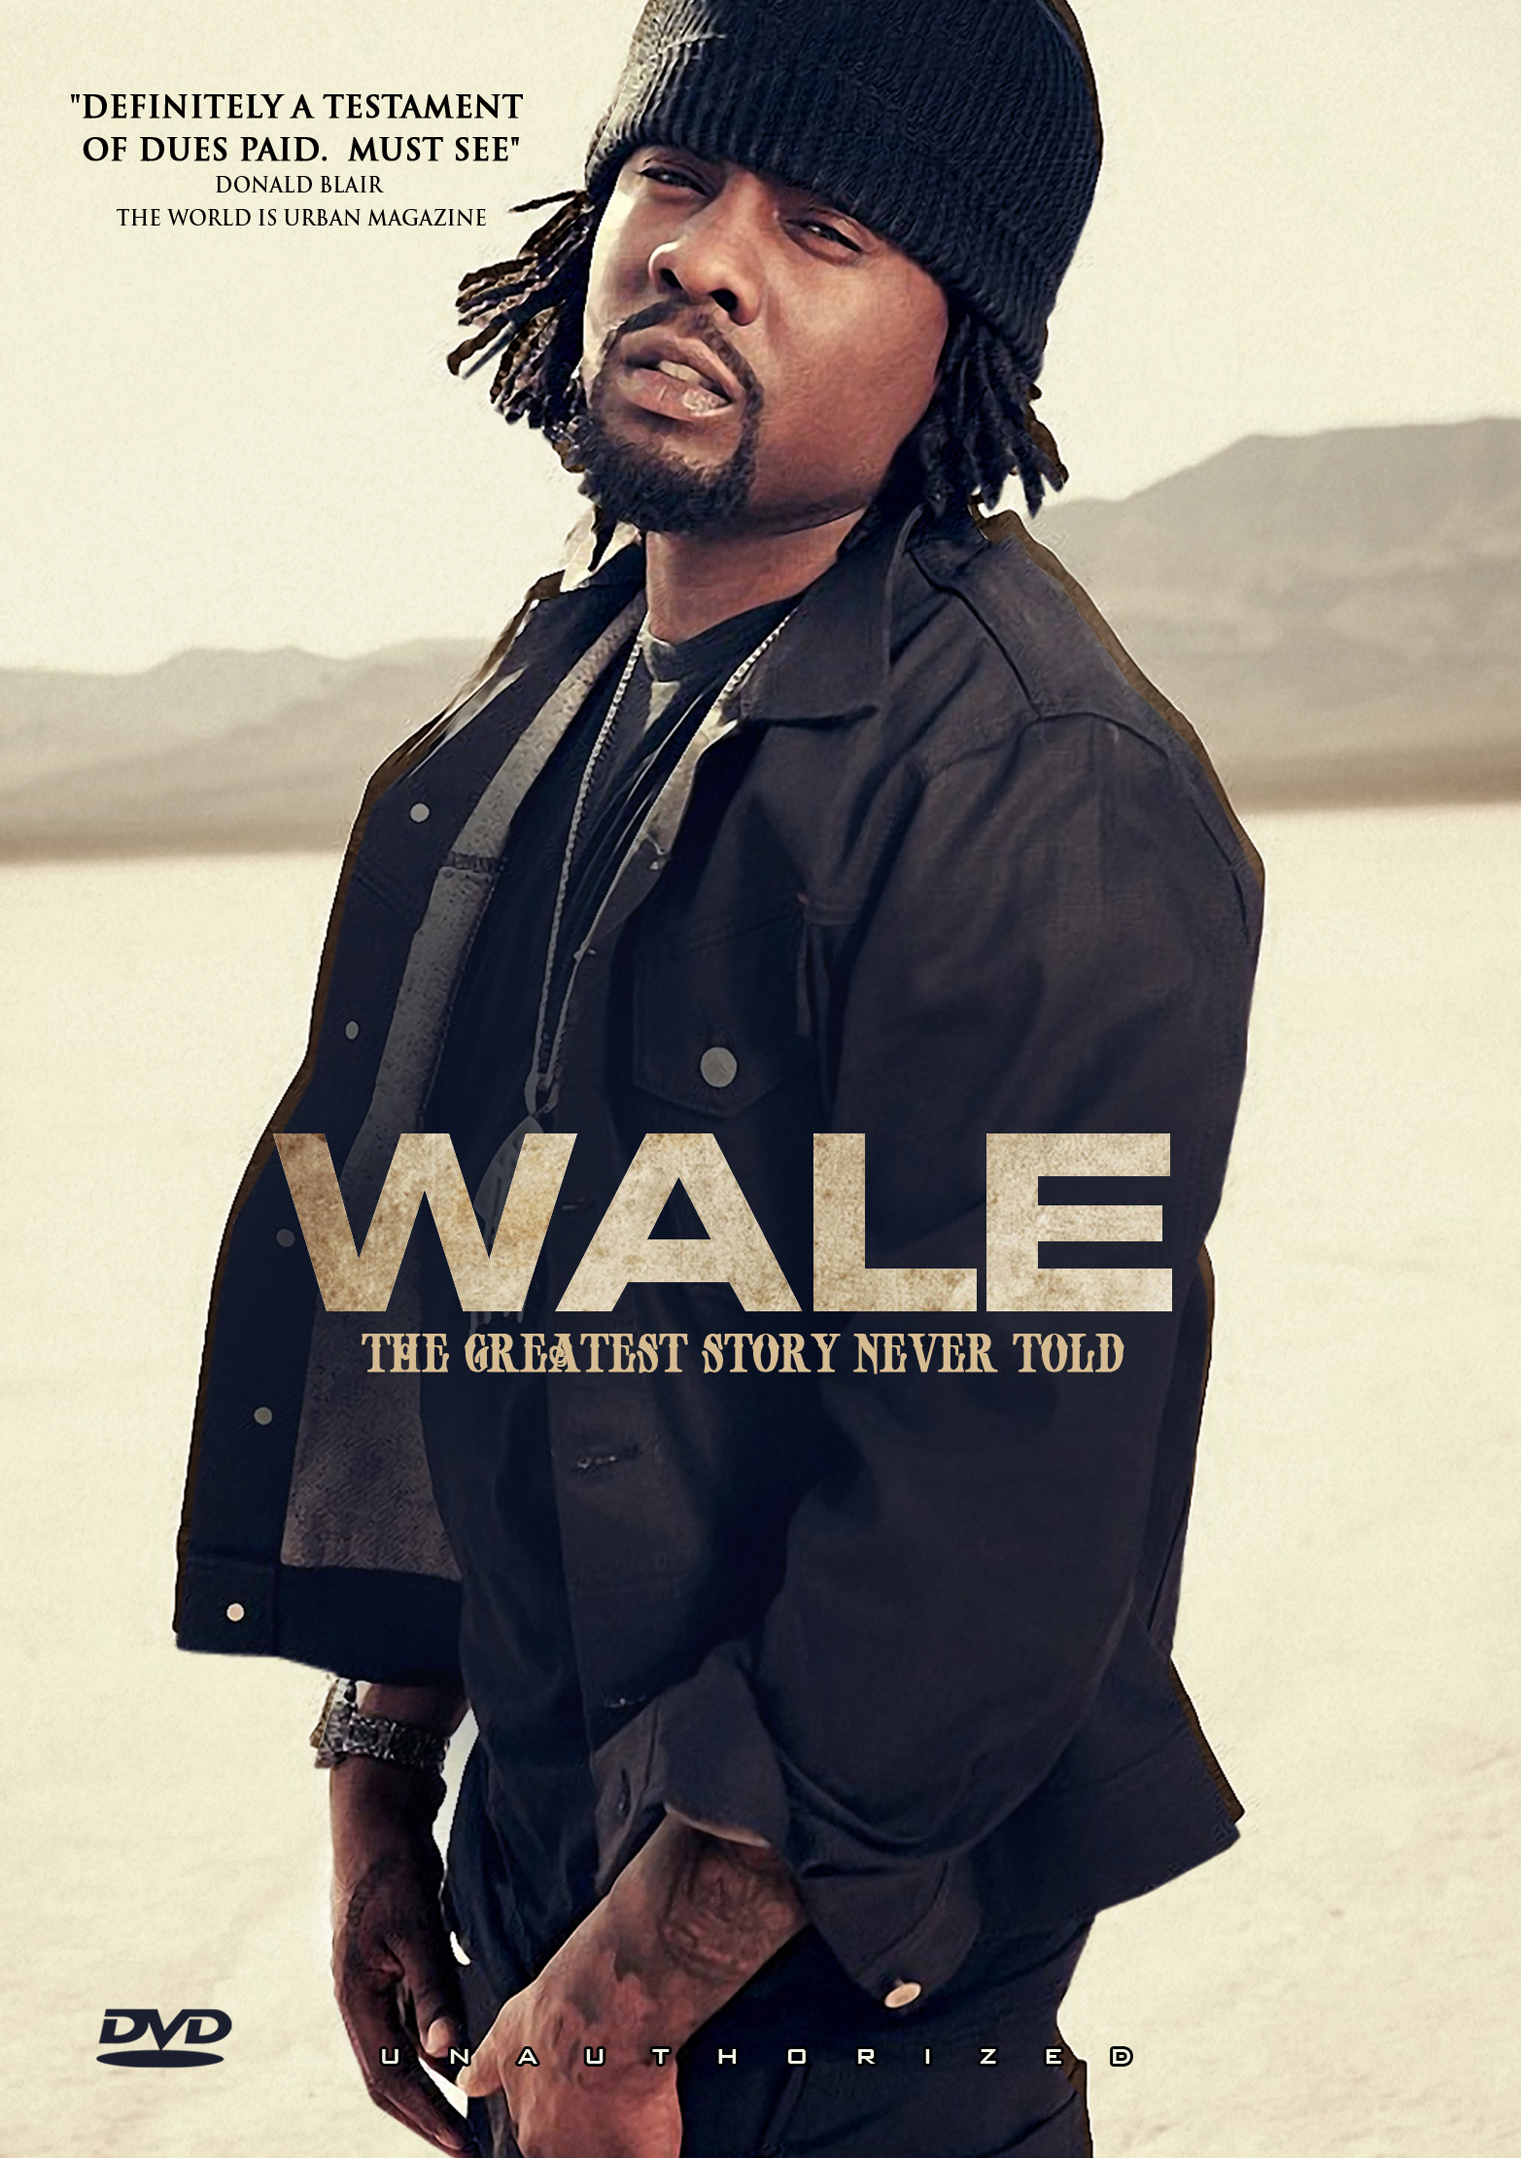 The Greatest story never told. Wale. The greatest love story never told